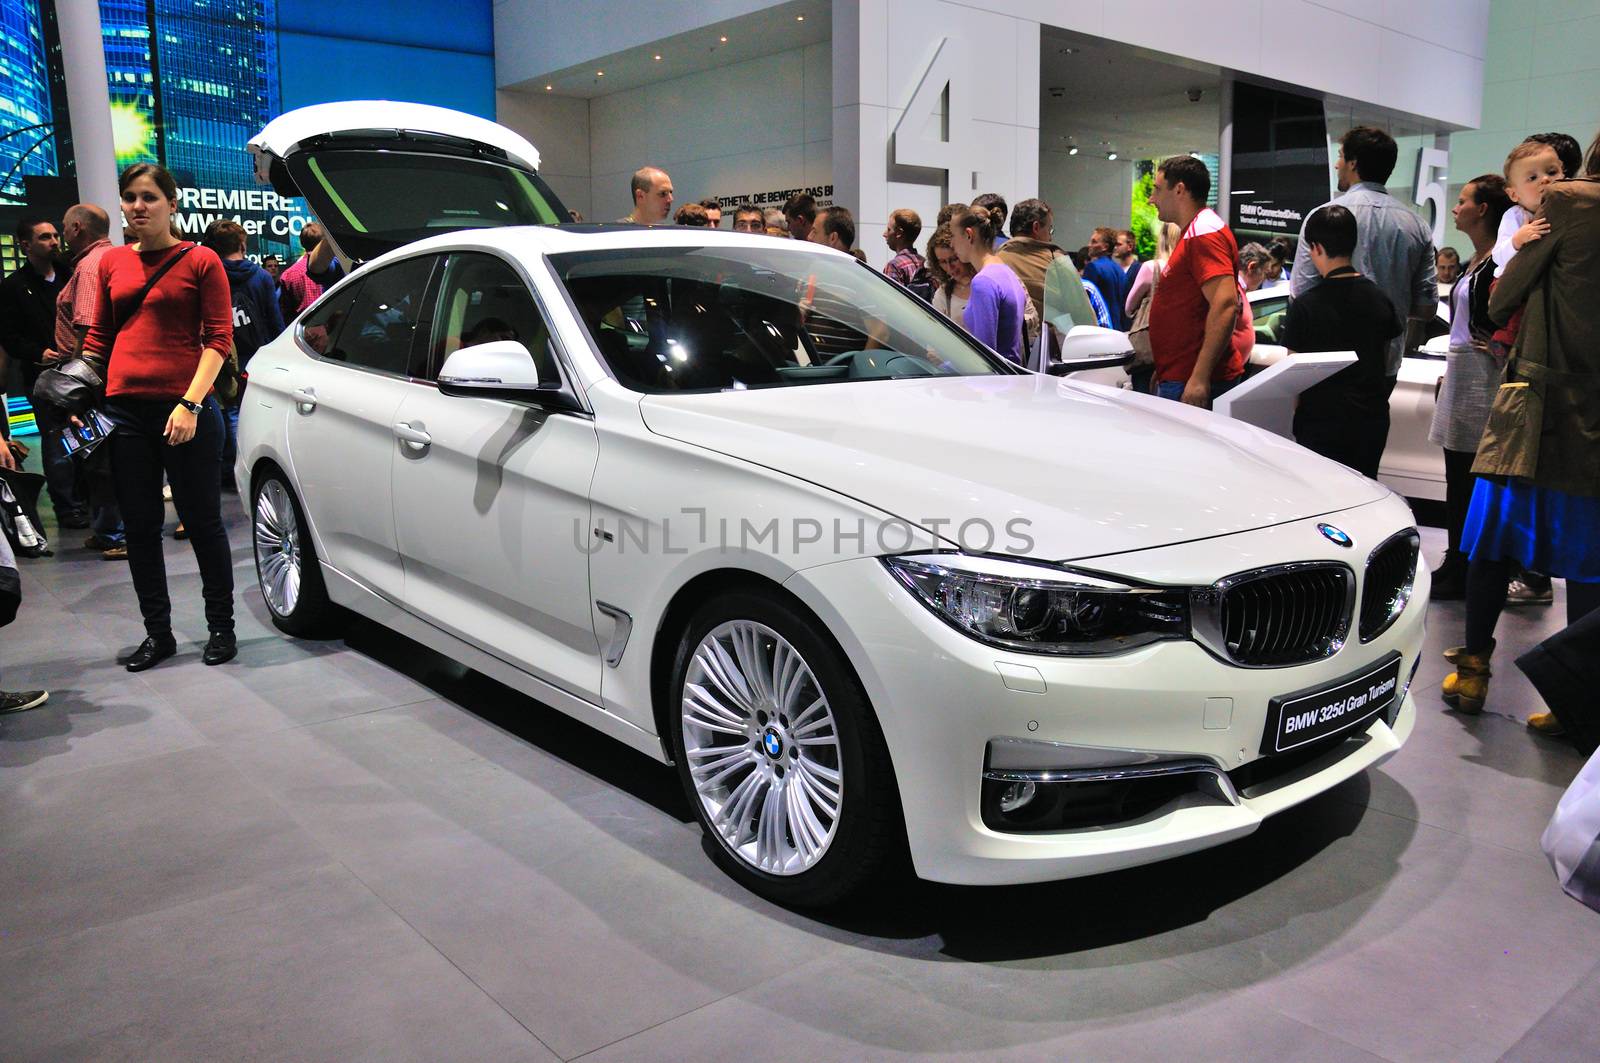 FRANKFURT - SEPT 14: BMW 3 series Gran Turismo (GT) presented as by Eagle2308